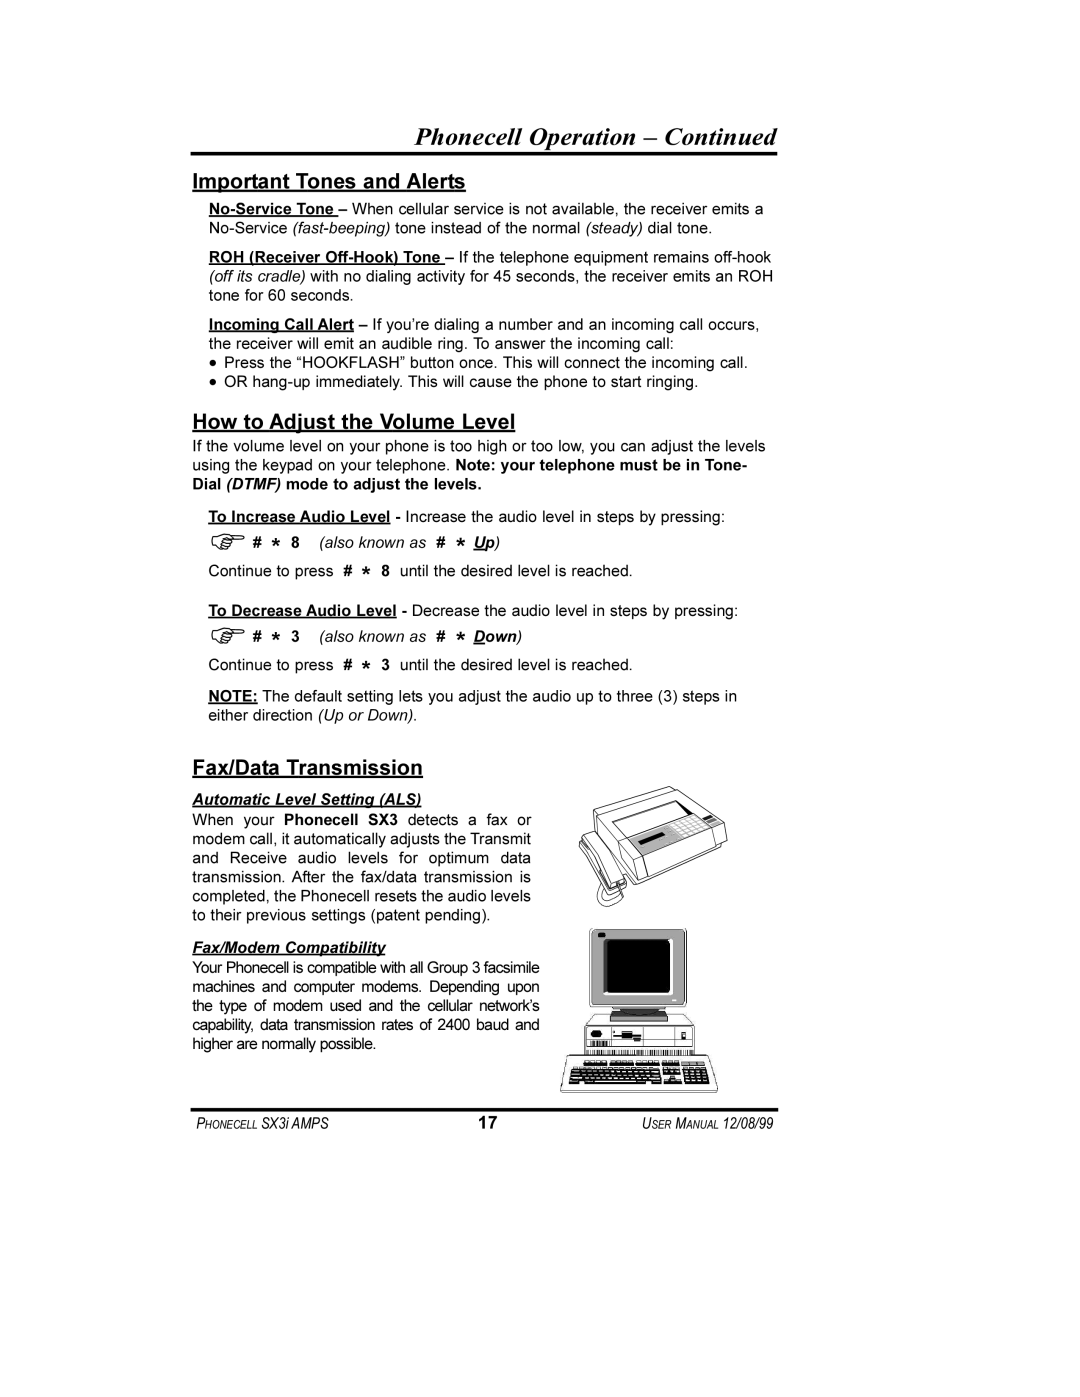 Telular SX3i user manual Phonecell Operation - Continued, Important Tones and Alerts, How to Adjust the Volume Level 